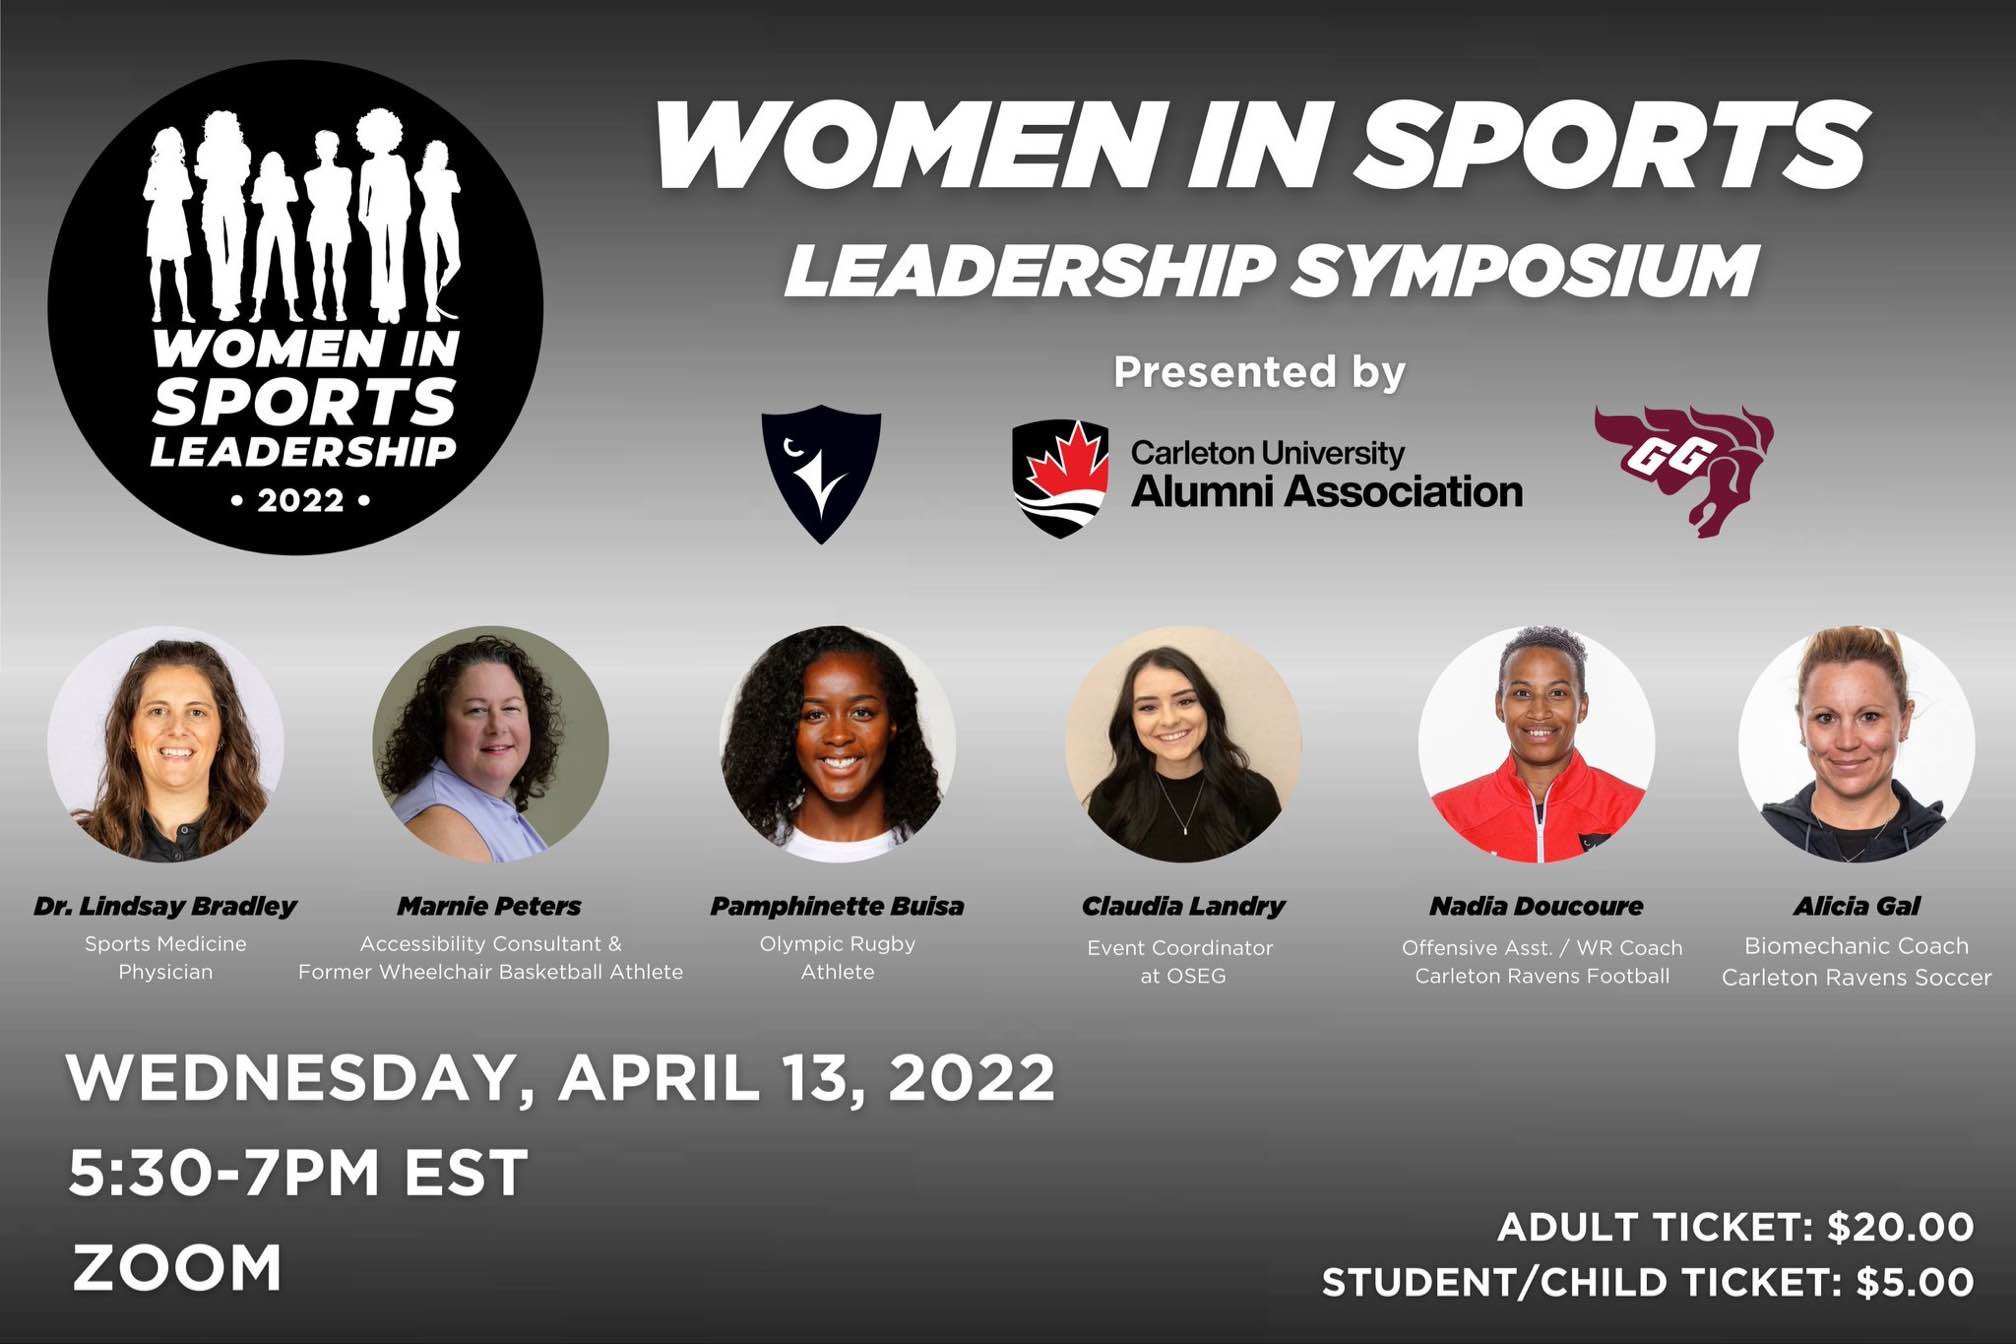 Promotional poster for the Women in Sports Leadership Symposium. The names of the panelists are: Dr. Lindsay Bradley (Sports Medicine Physician), Marnie Peters (Accessibility Consultant & Former Wheelchair Basketball Athlete), Pamphinette Bulsa (Olympic Rugby Athlete), Claudia Landry (Event Coordinator at OSEG), Nadia Doucoure (Offensive Asst/WR Coach Carleton Ravens Football), and Alicia Gal (Biomechanic Coach Carleton Ravens Soccer). The event takes place on Wednesday, April 13th 2022 from 5:30pm to 7pm EST over Zoom. Adult tickets are 20 dollars and student/child tickers are 5 dollars.